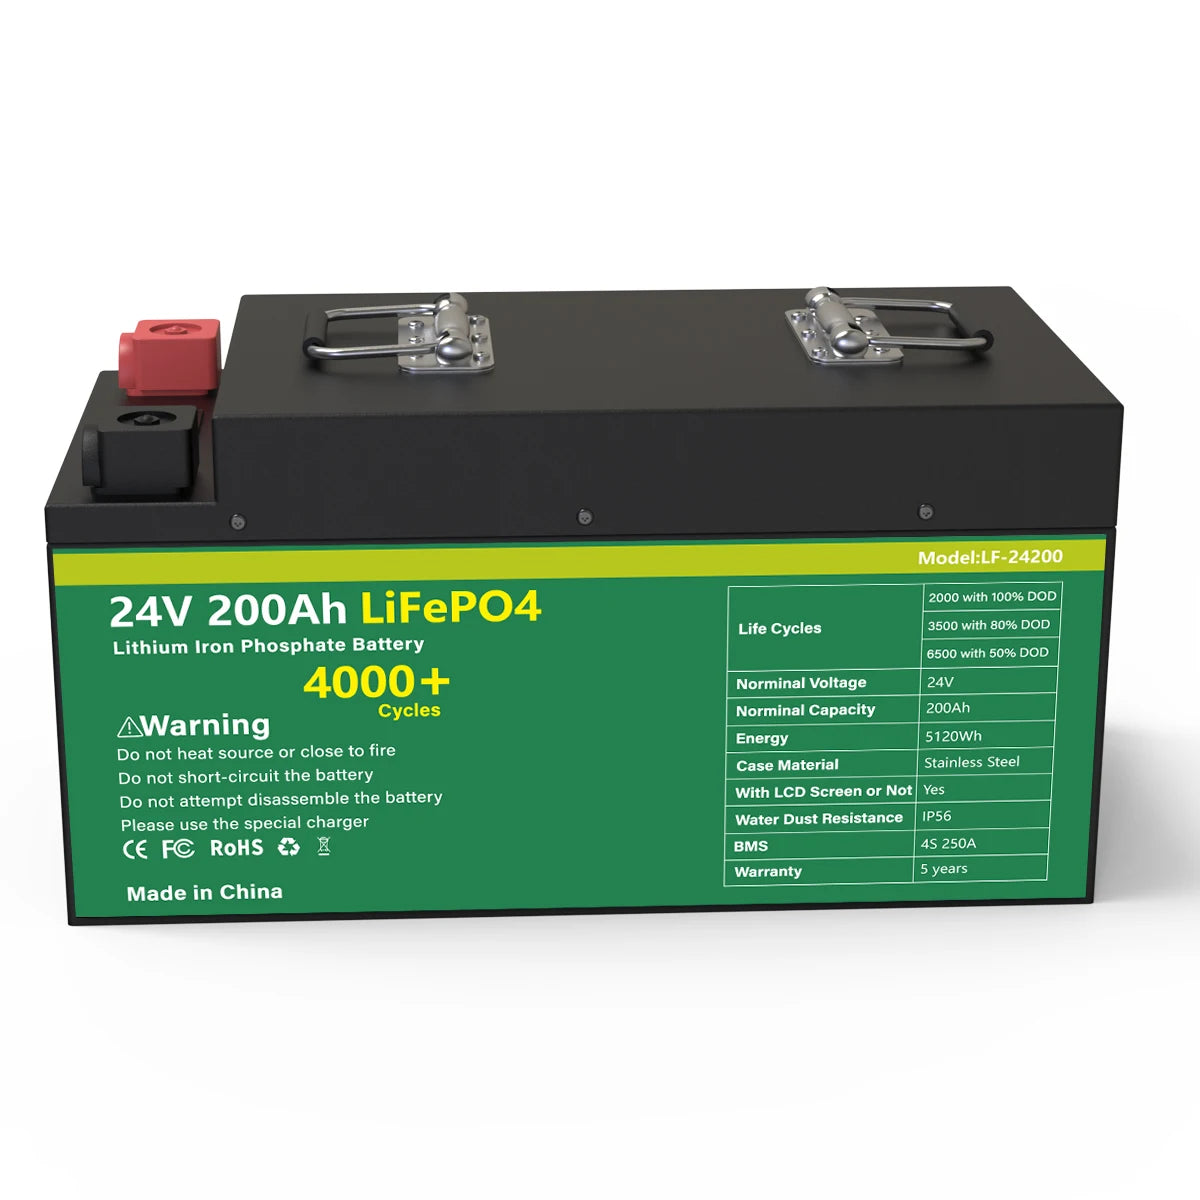 24V 200AH LiFePO4 Battery, 24V, 200Ah LiFePO4 battery pack with 100% DOD and 3500 life cycles.